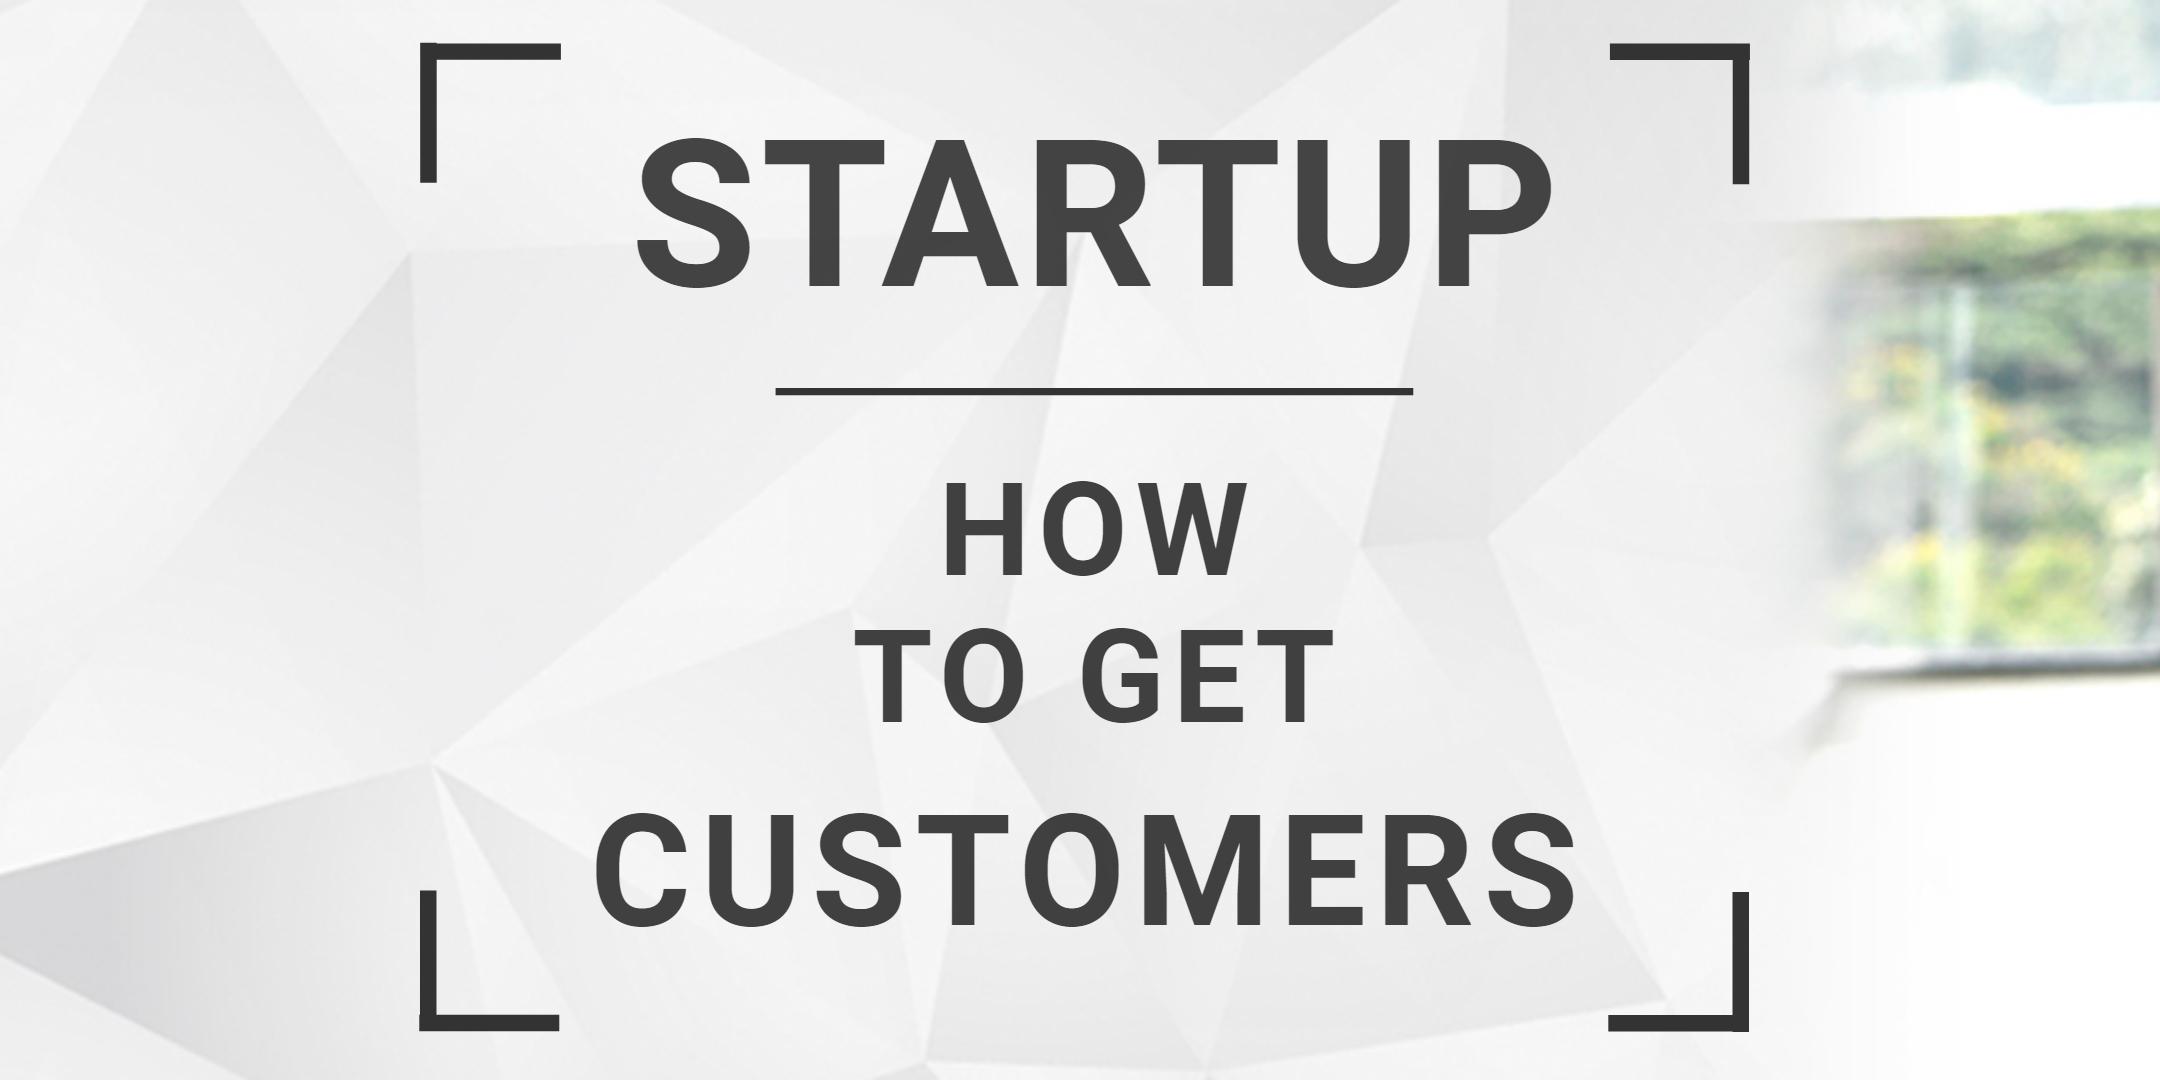 Startup Business Customer Acquisition